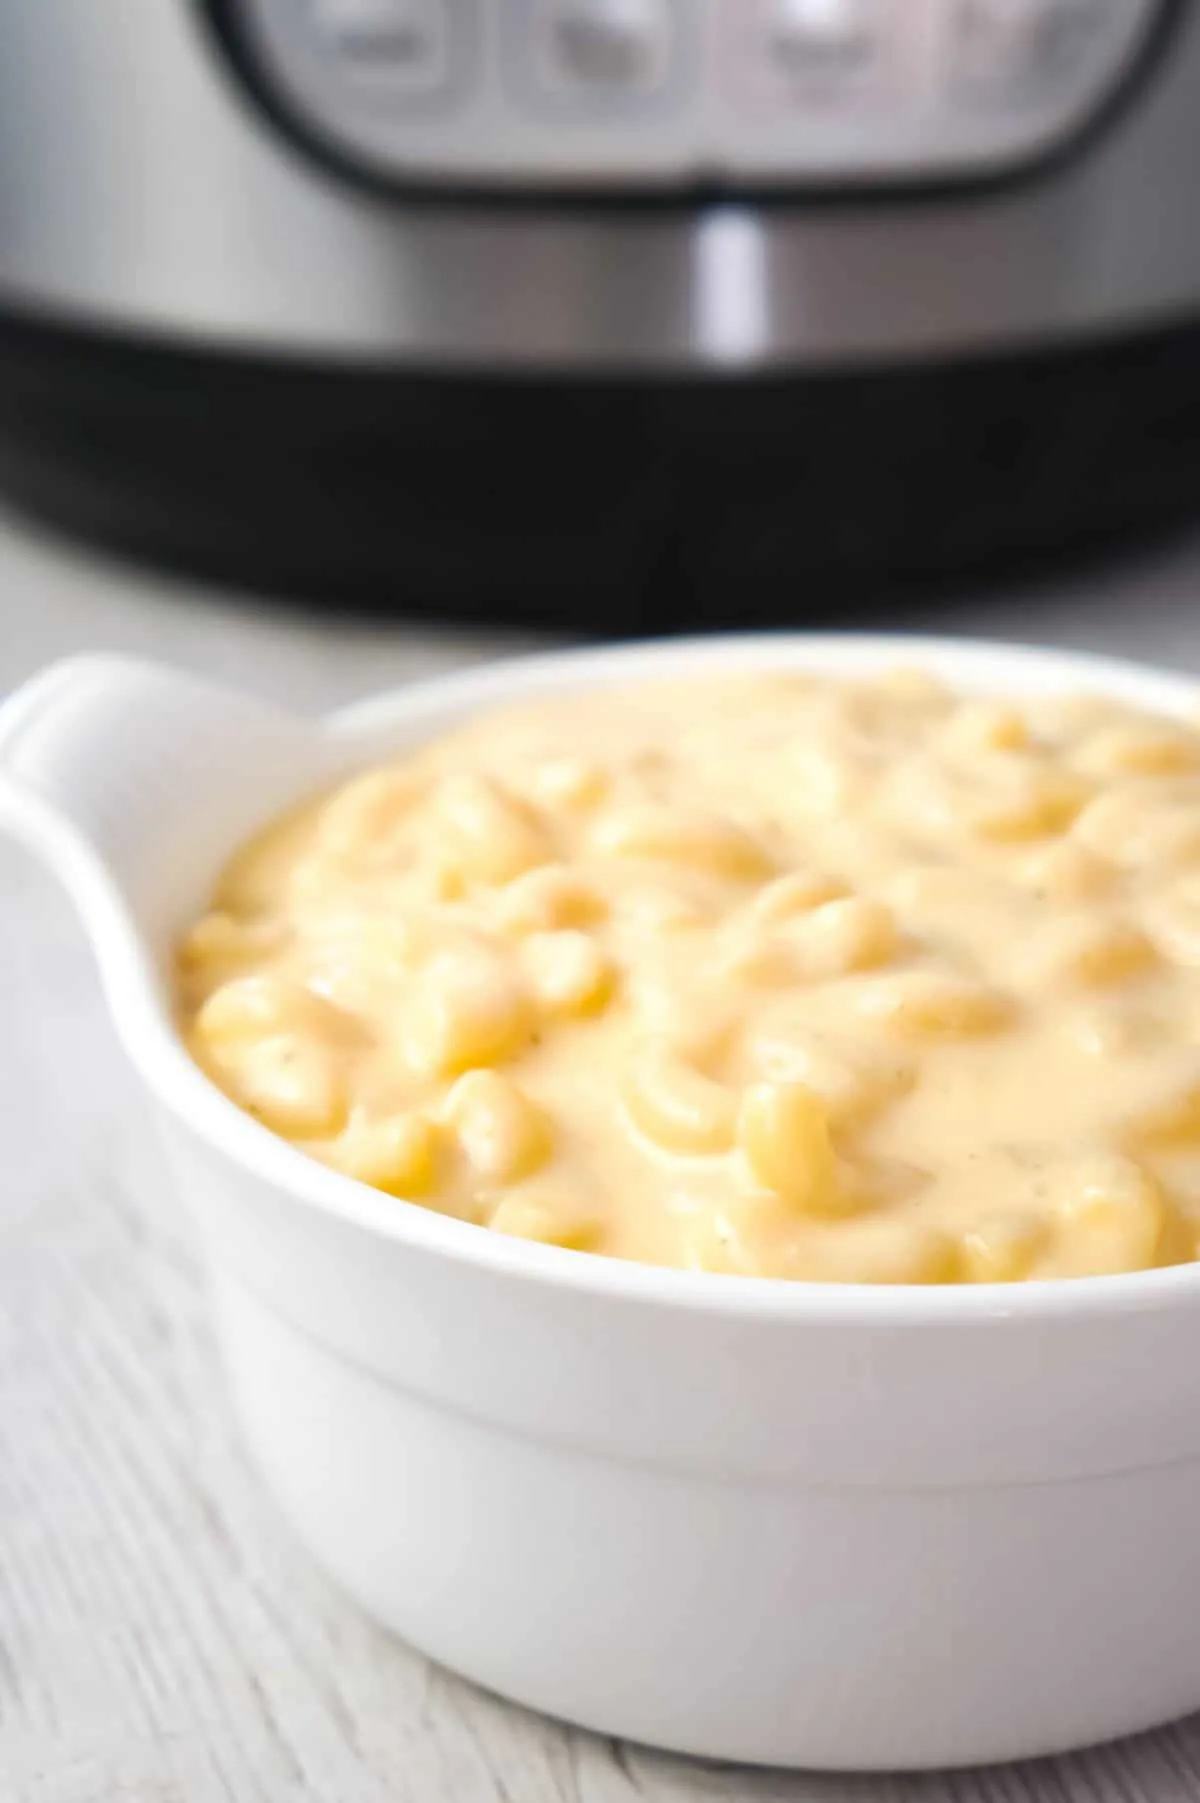 Instant Pot Extra Creamy Mac and Cheese is a simple and delicious pressure cooker pasta recipe made with cheddar cheese soup, heavy cream, mozzarella and cheddar cheese.